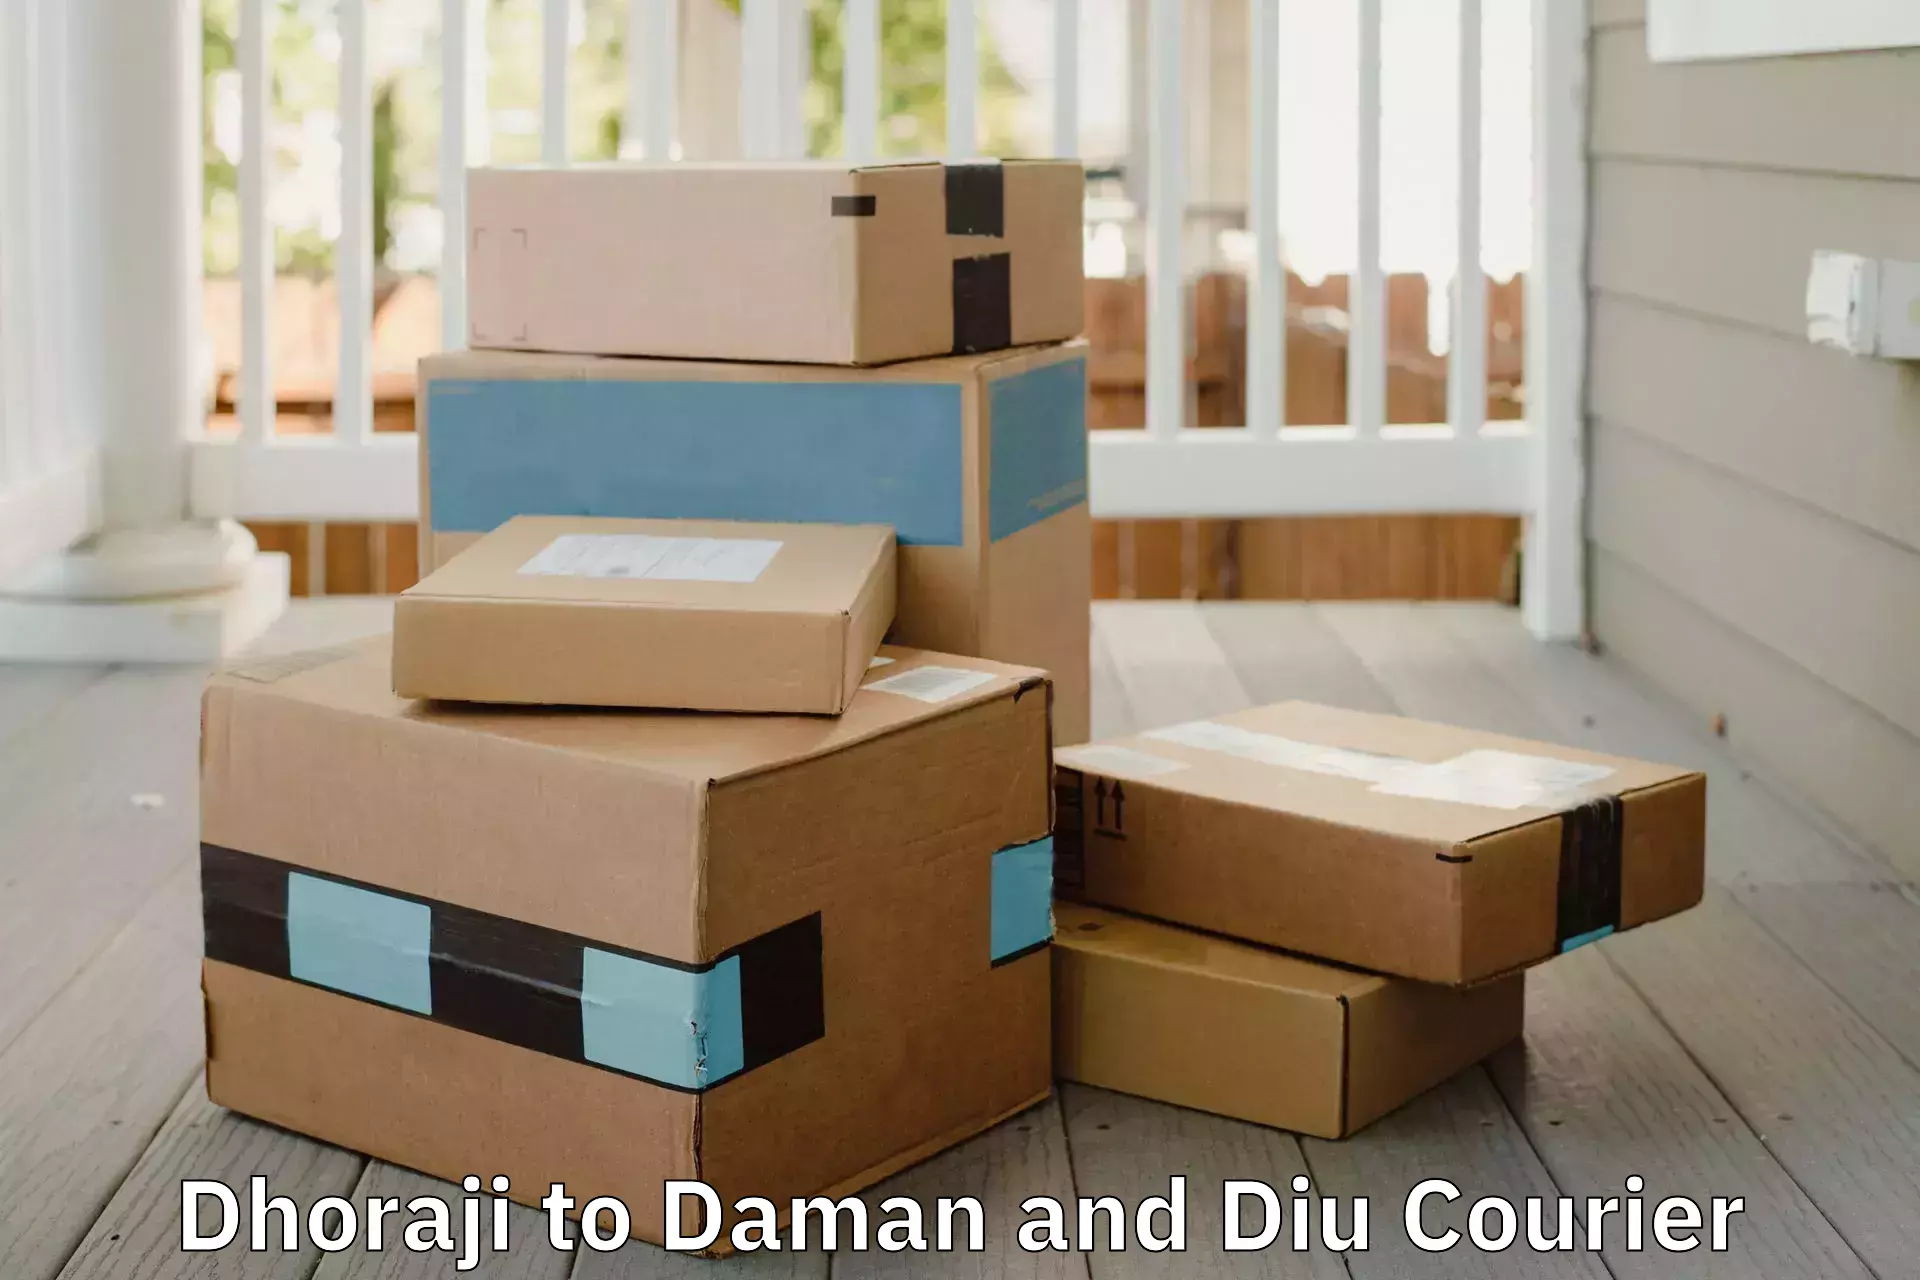 Trusted relocation services Dhoraji to Daman and Diu